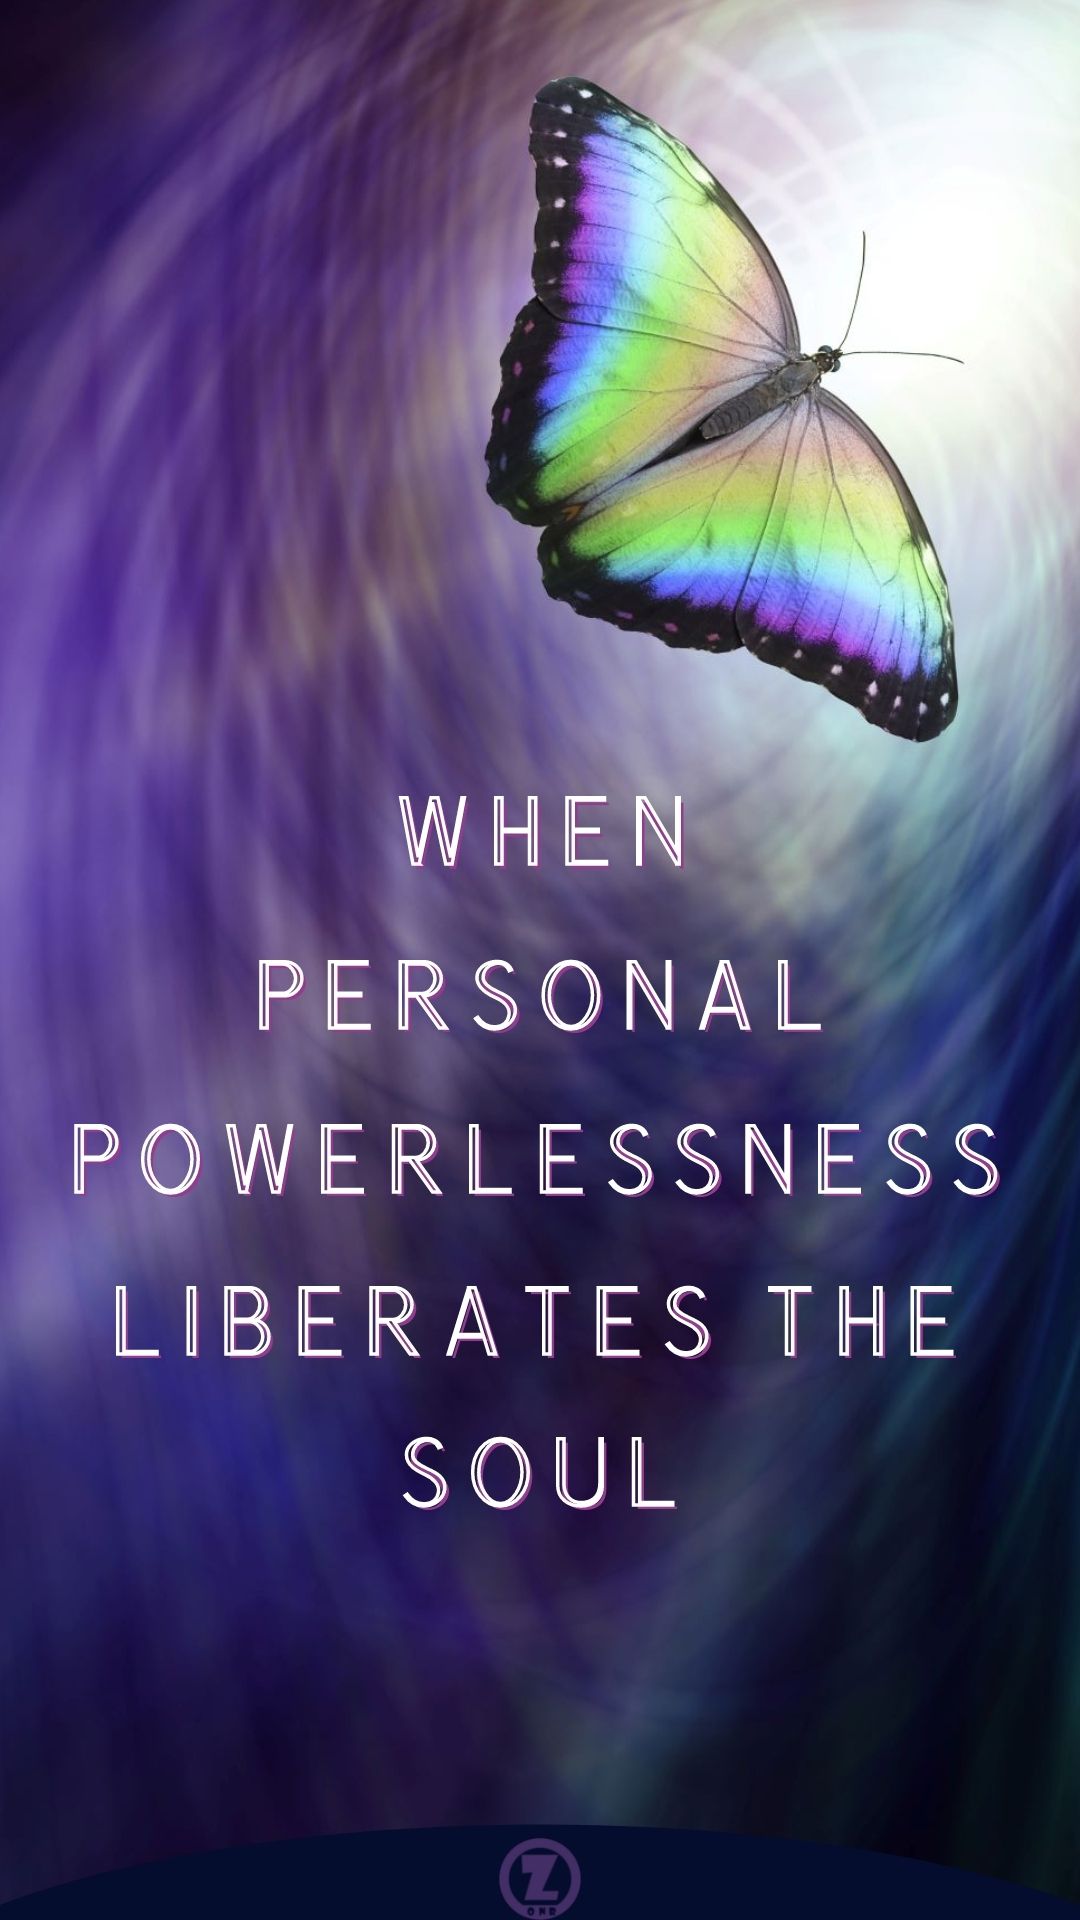 How Admitting Personal Powerlessness is an Admission that We can’t Control Everything – Step 1